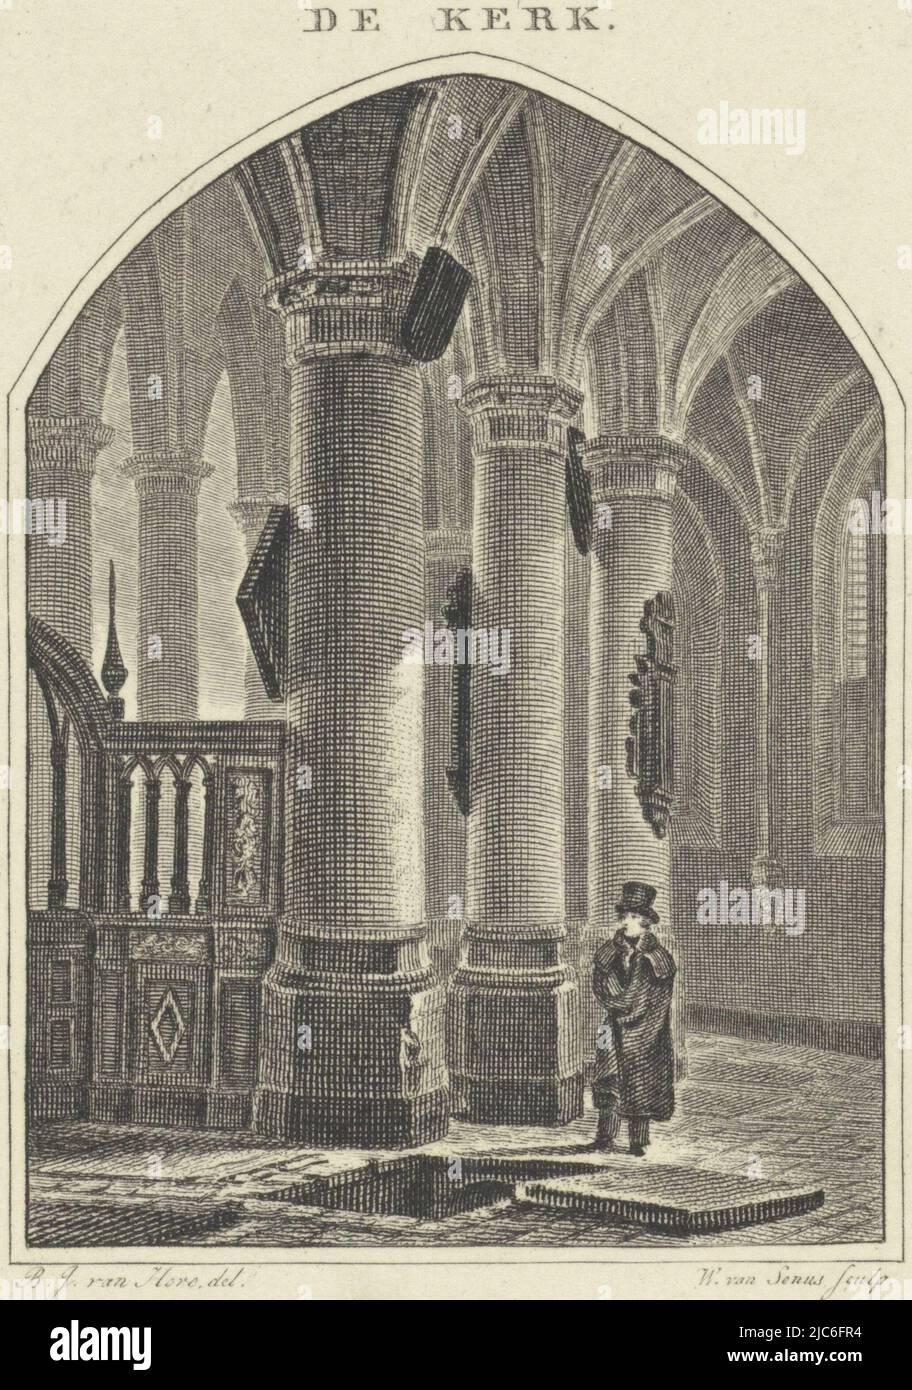 Man at an open grave in a church The church , print maker: Willem van Senus, (mentioned on object), intermediary draughtsman: Bartholomeus Johannes van Hove, (mentioned on object), Netherlands, 1800 - 1851, paper, etching, engraving, h 126 mm × w 100 mm Stock Photo